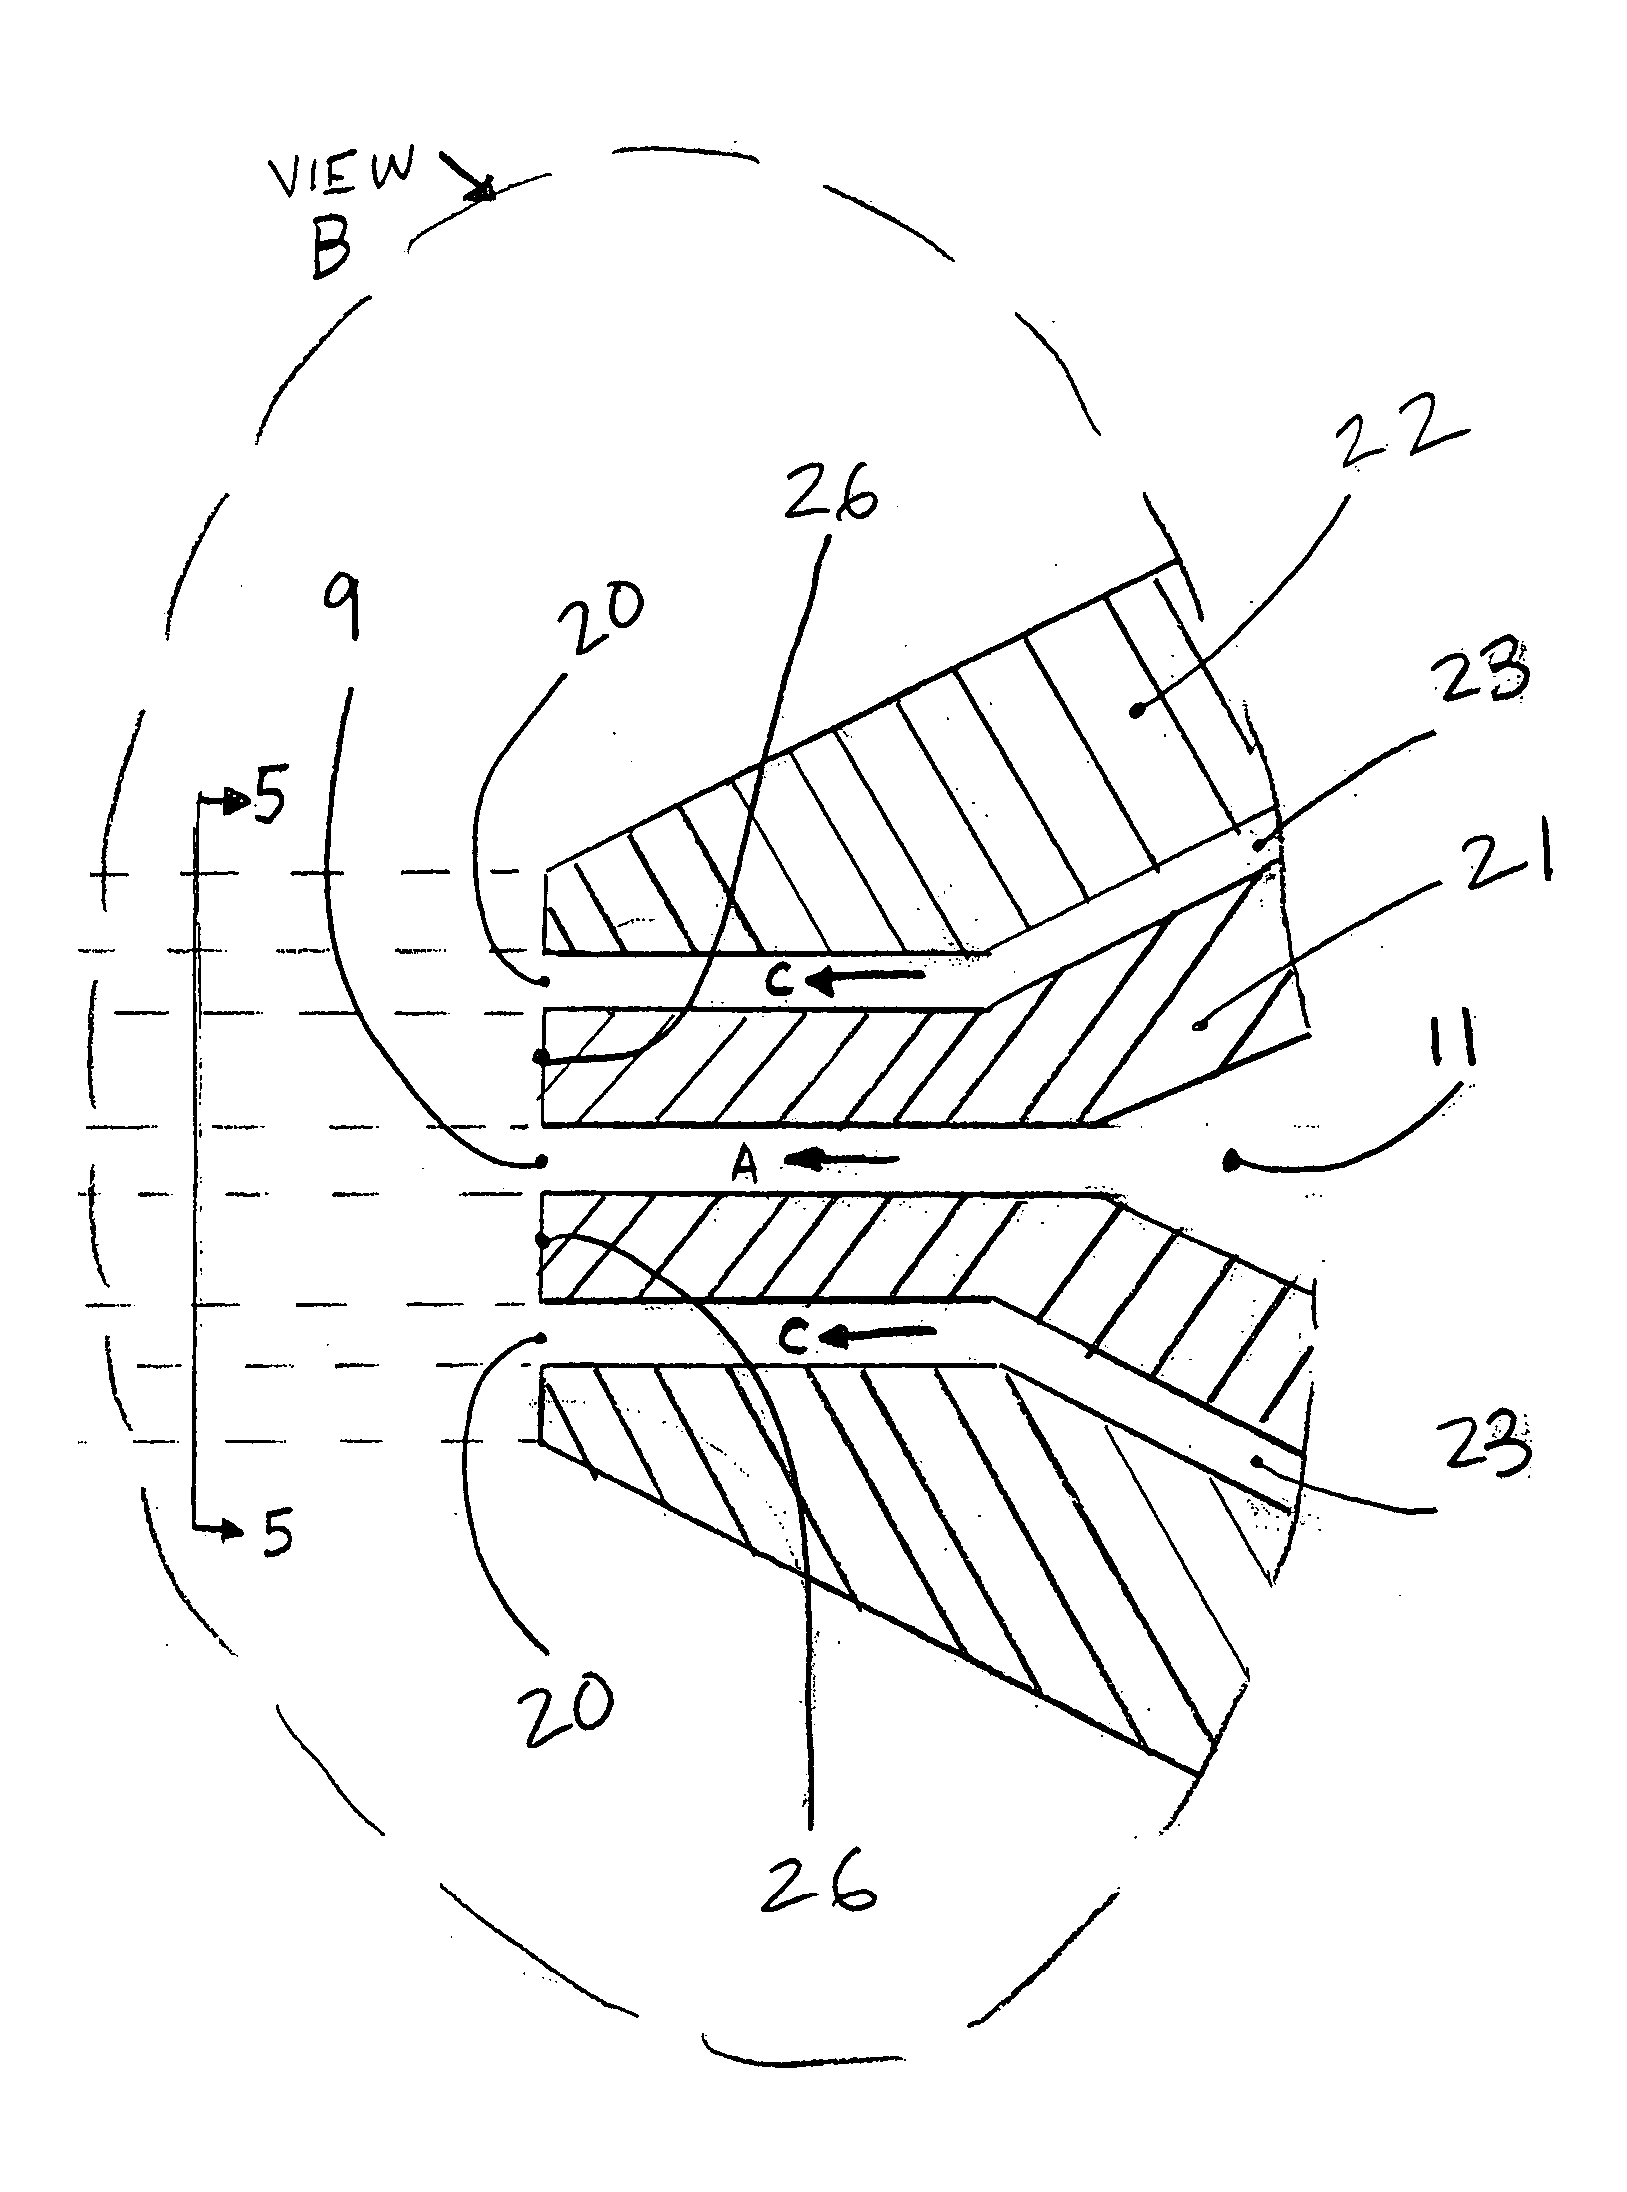 Method for fine bore orifice spray coating of medical devices and pre-filming atomization